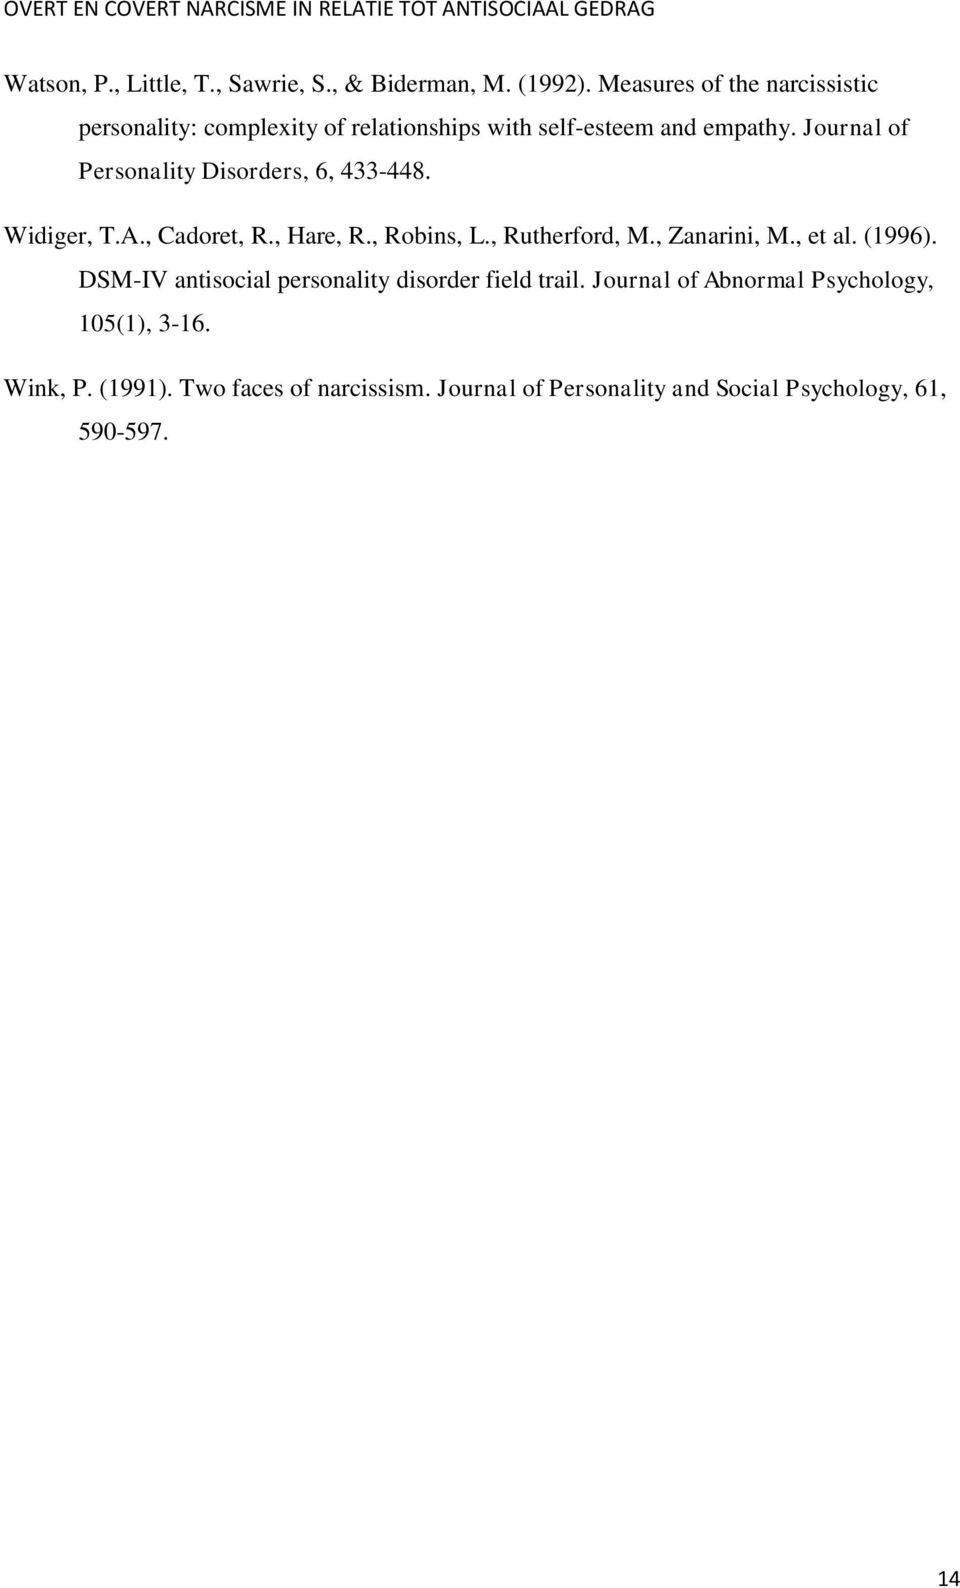 Journal of Personality Disorders, 6, 433-448. Widiger, T.A., Cadoret, R., Hare, R., Robins, L., Rutherford, M., Zanarini, M.